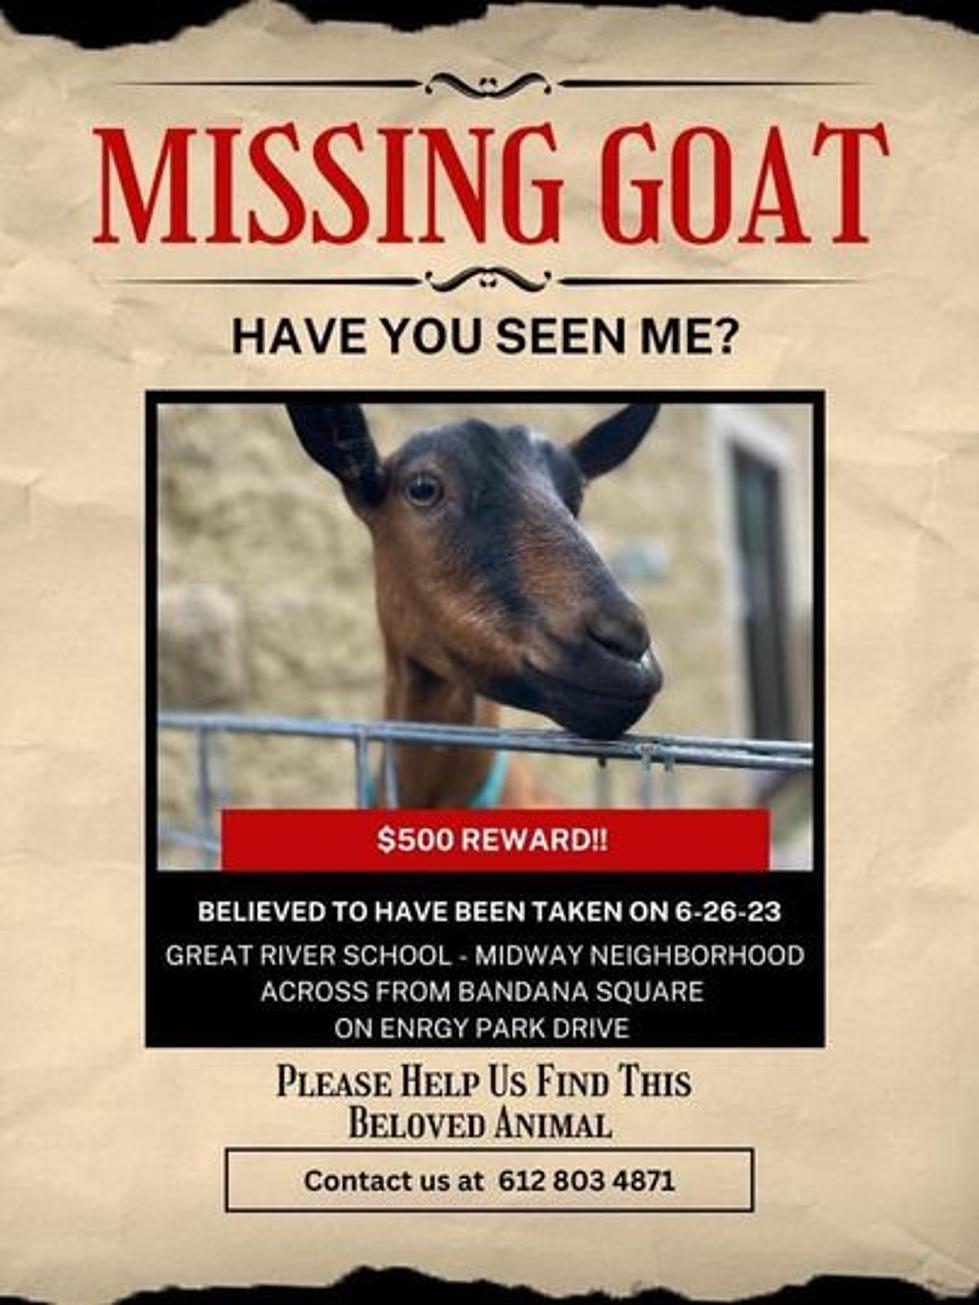 Have You Seen This Goat? Reward for Missing/Stolen Goat